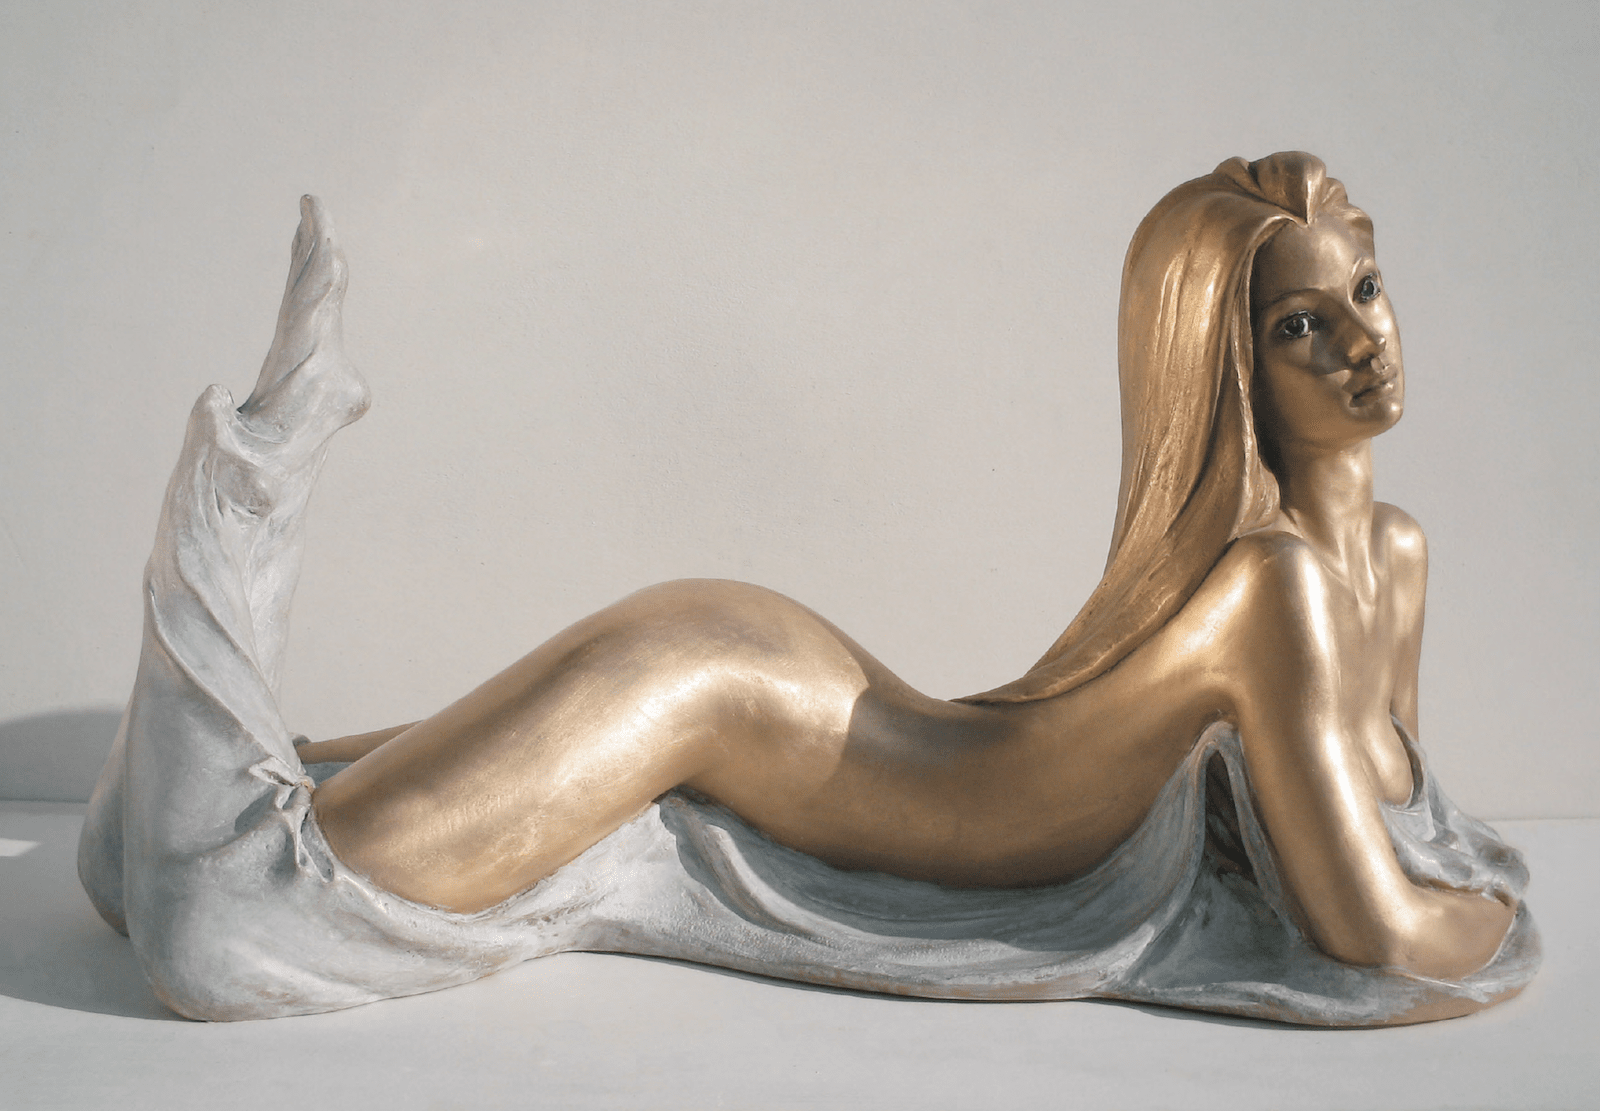 Bronze-statues-of-women-sculptures-artistic-female-nudes-Seleny-cm60x33x30-year-2007